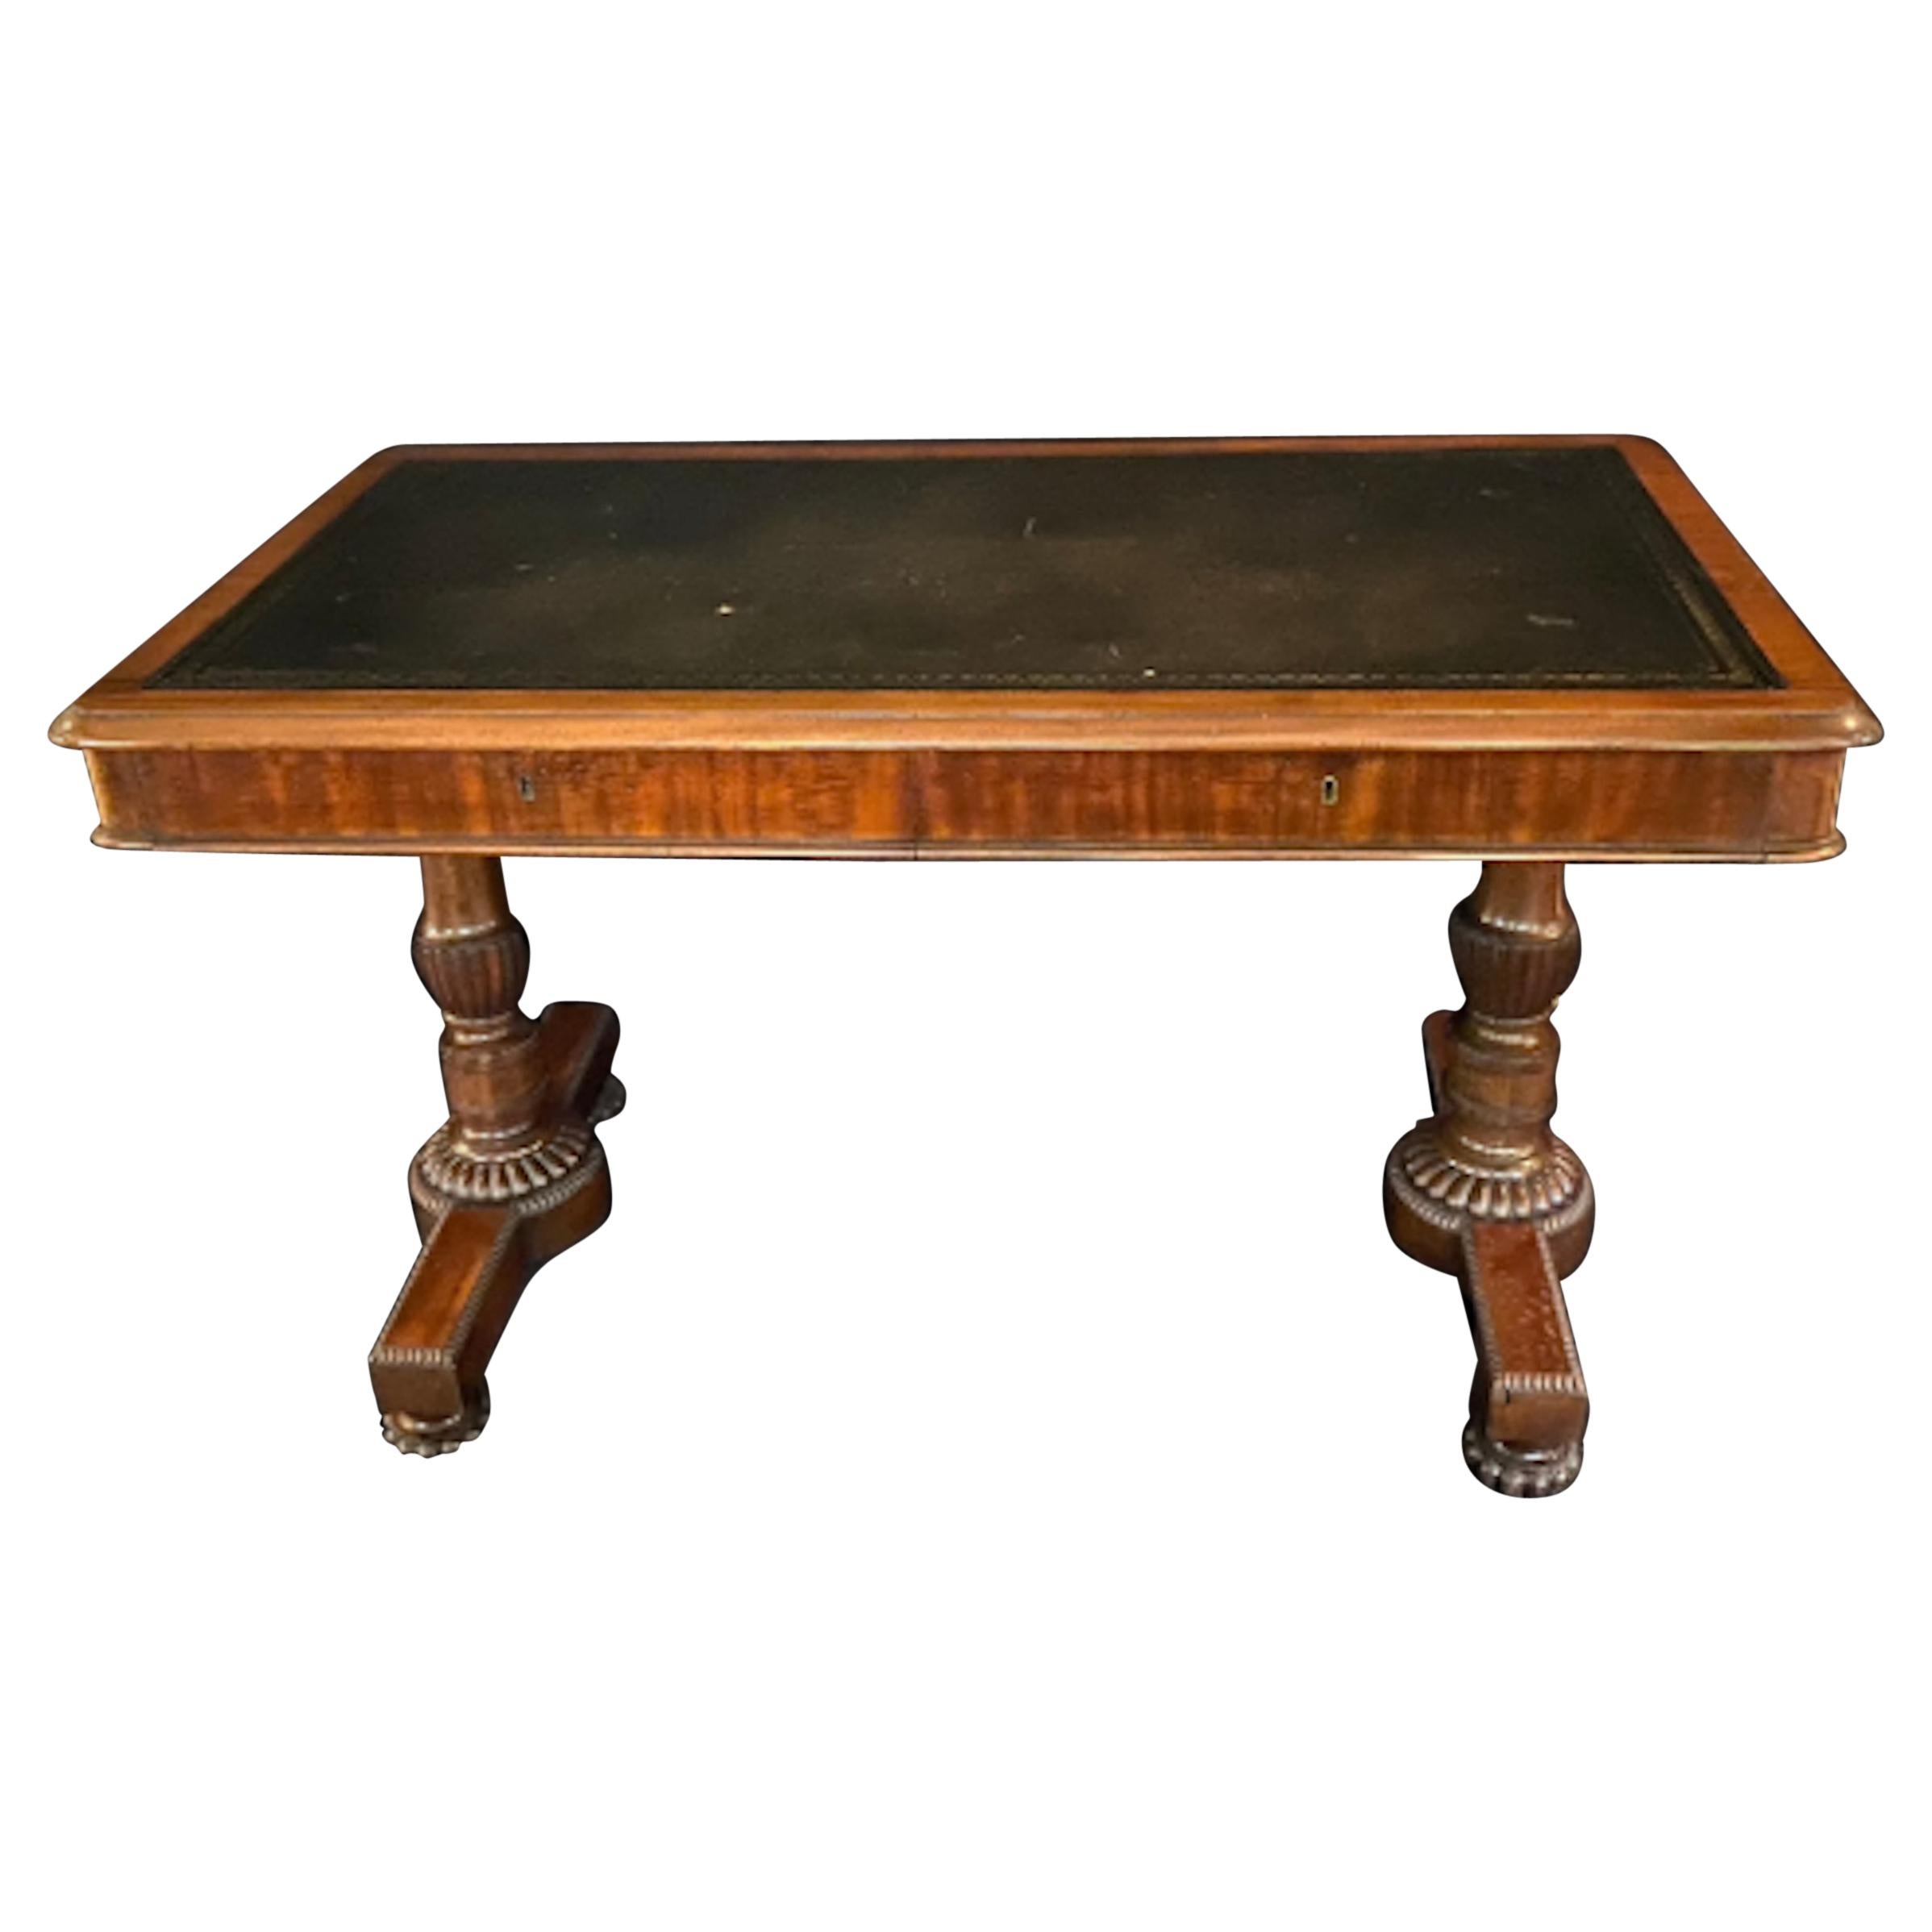 Leather Topped Regency Rectangular Mahogany Pedestal Table For Sale